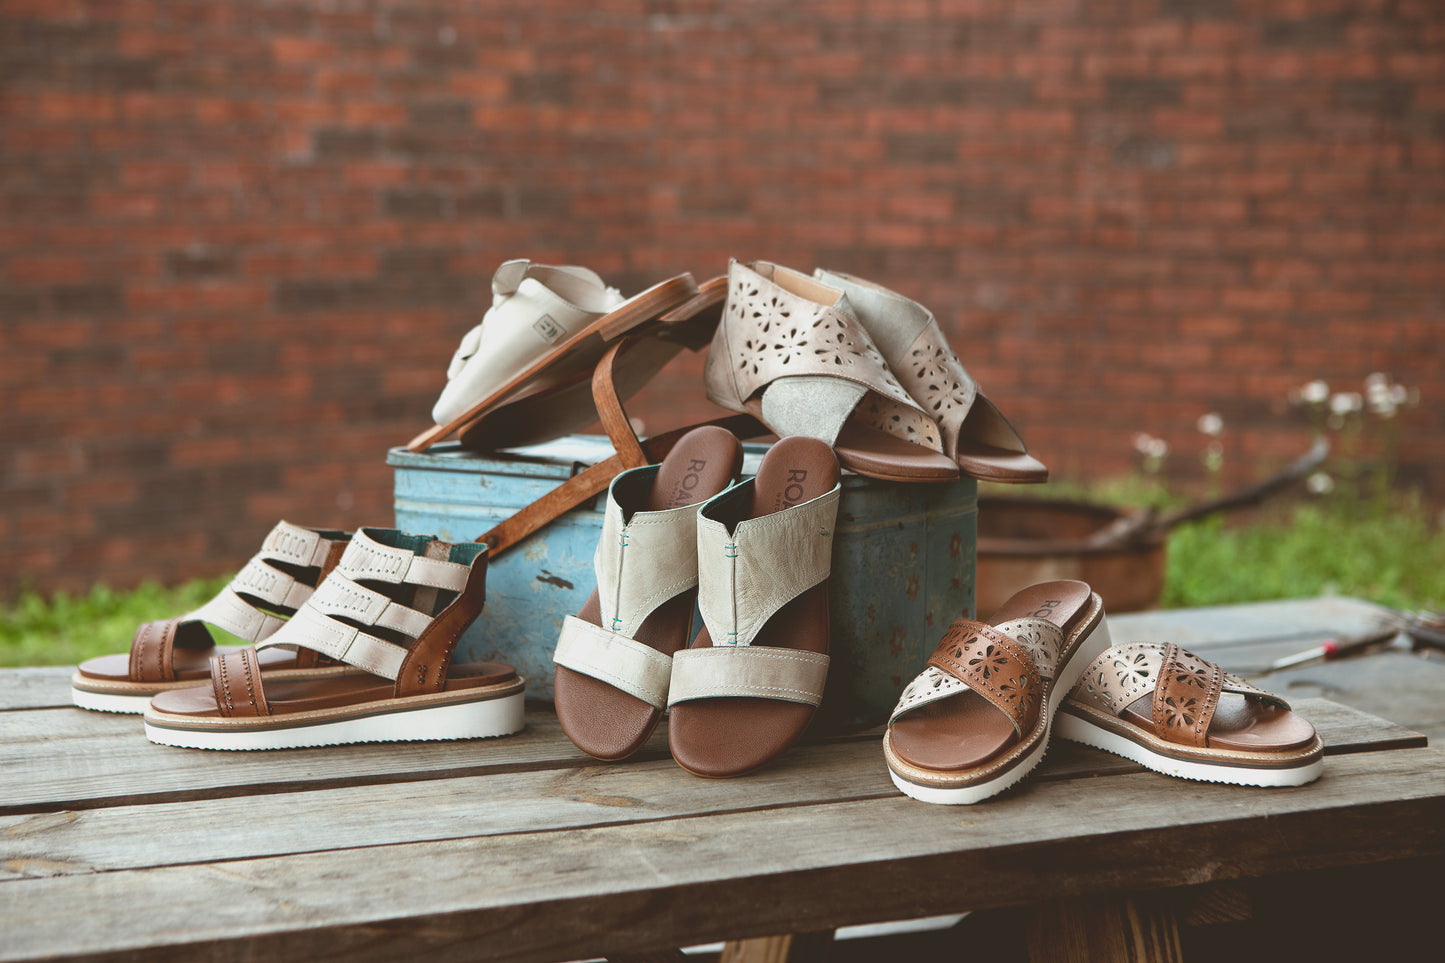 A collection of sandals with various designs and colors are arranged on a rustic wooden table, with a brick wall and greenery in the background.